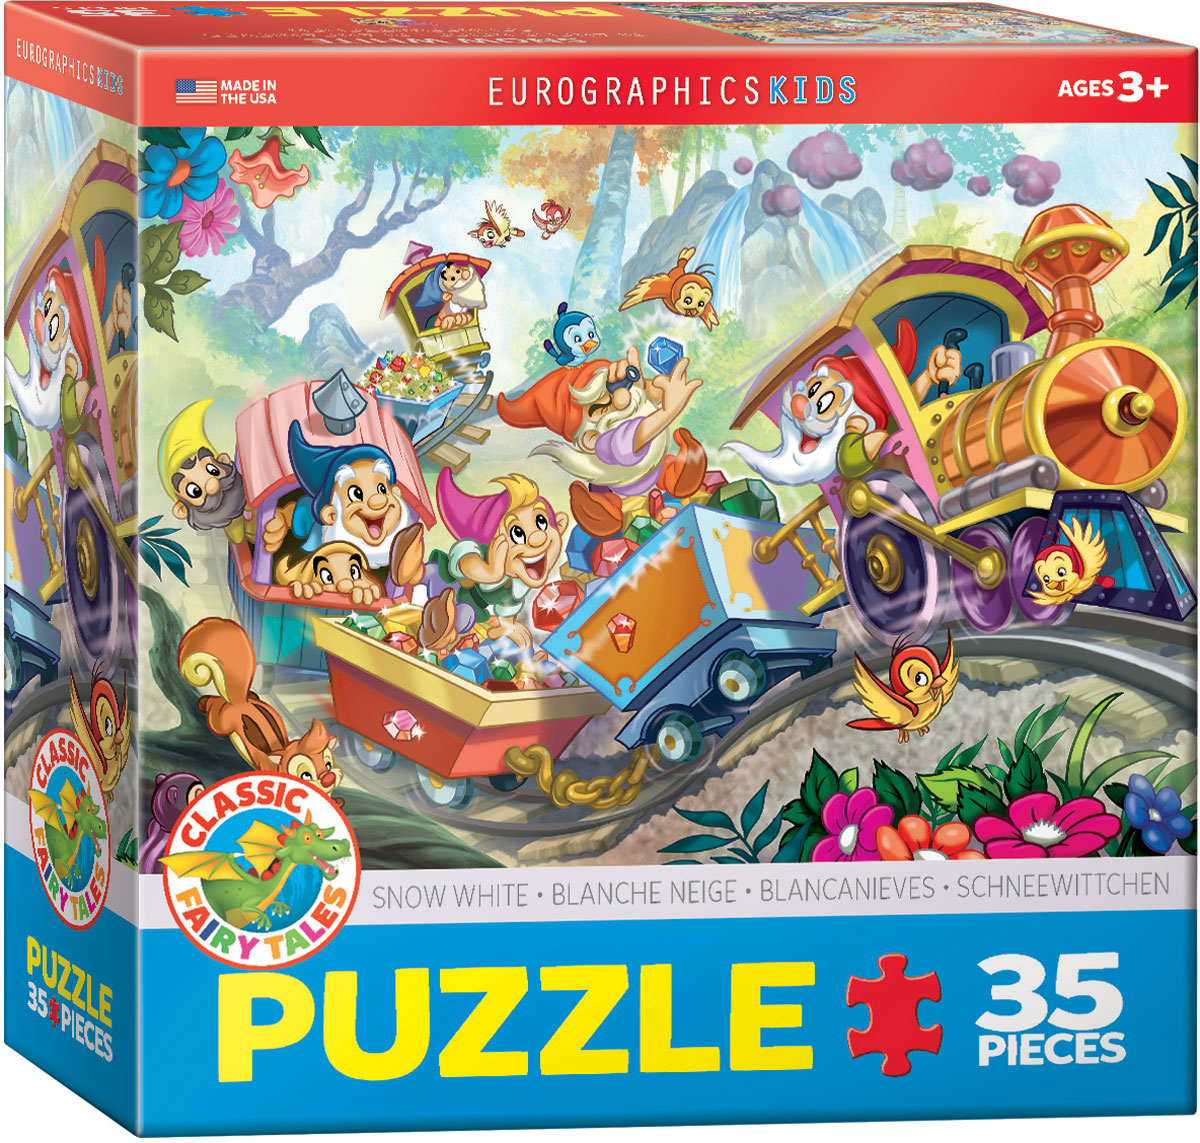 Puzzle: Eurographics 35 Snow White | Impulse Games and Hobbies